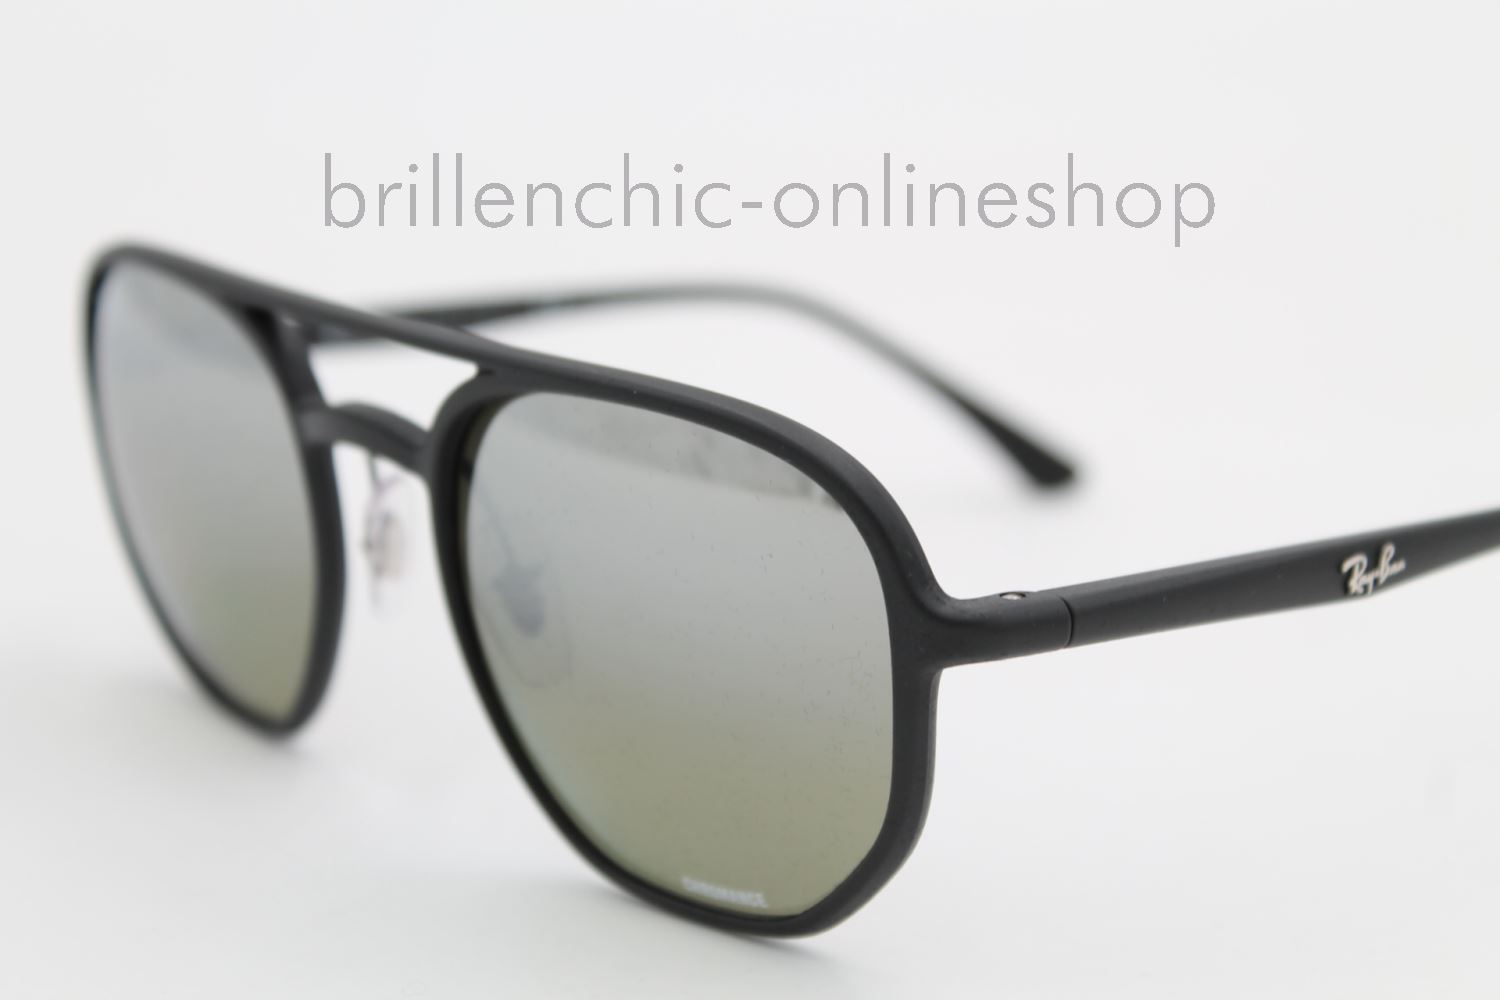 Brillenchic-onlineshop in Berlin - Ray Ban CHROMANCE RB 4321CH 4321 601/S5J  - POLARIZED 